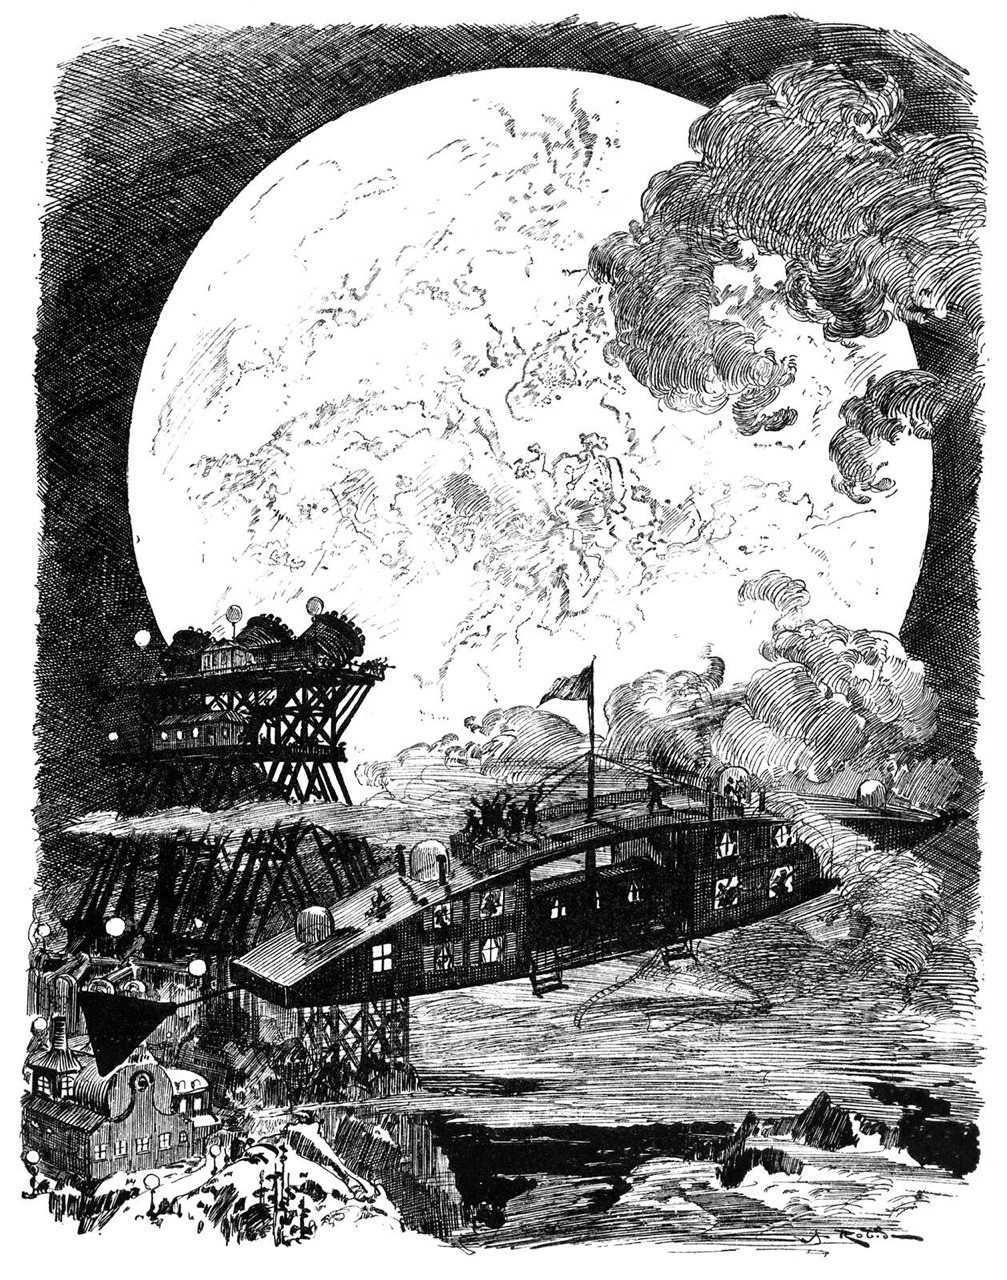 talesfromweirdland: A trip to the moon, as envisioned in 1883.  Illustration by French